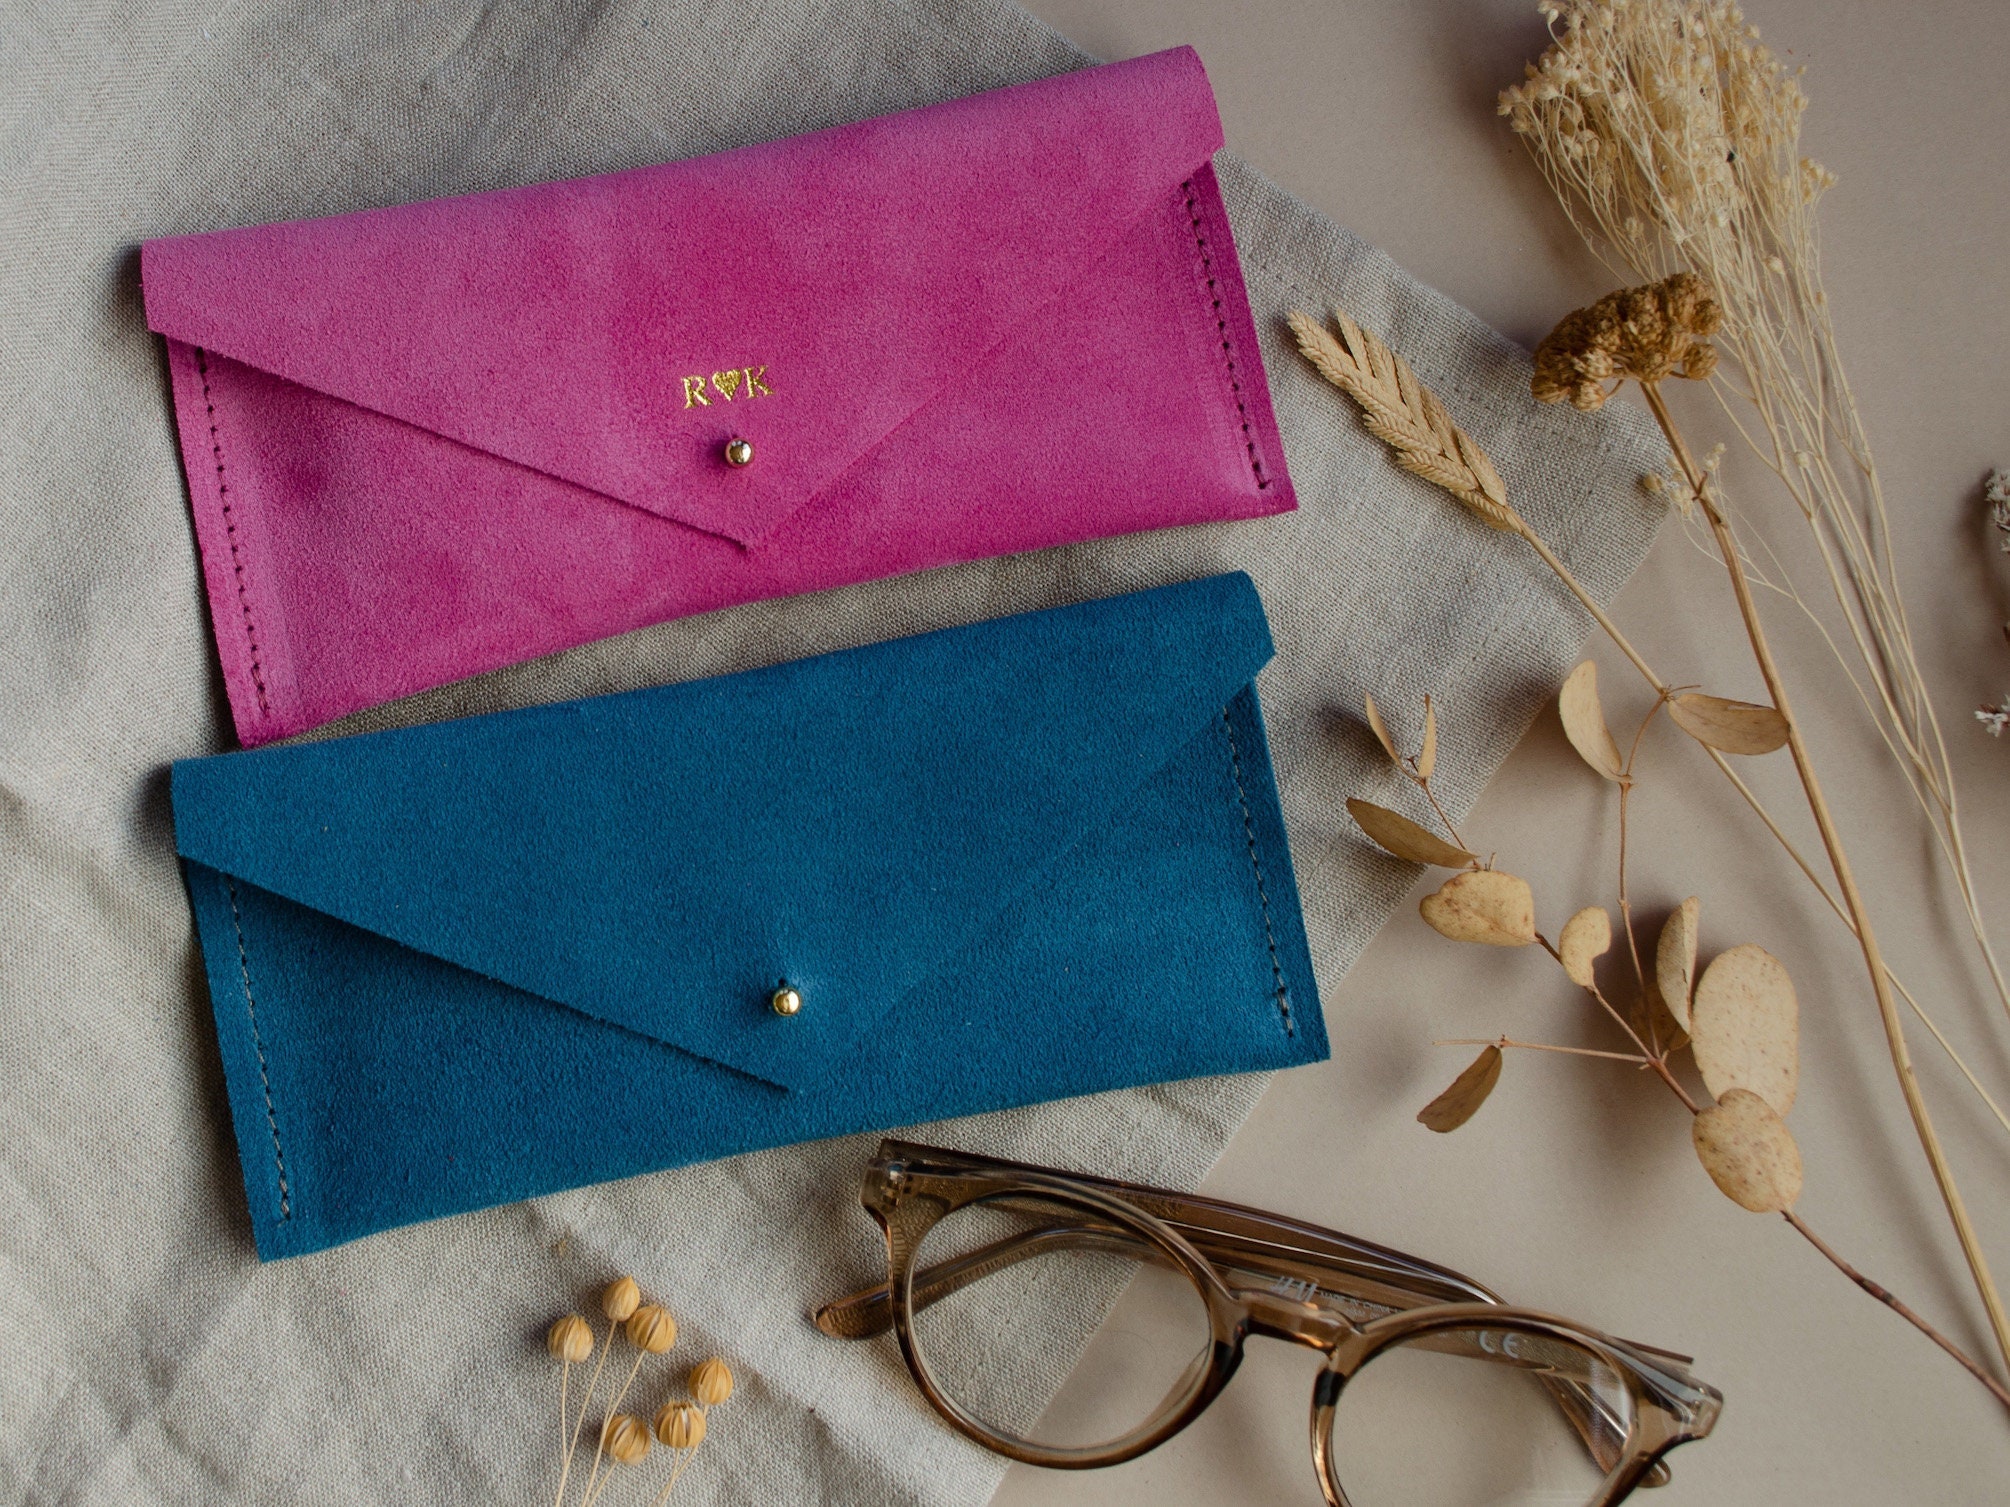 Personalised Suede Glasses Case, Monogram Leather Sunglasses Pouch. Minimalist Design in Pink & Teal